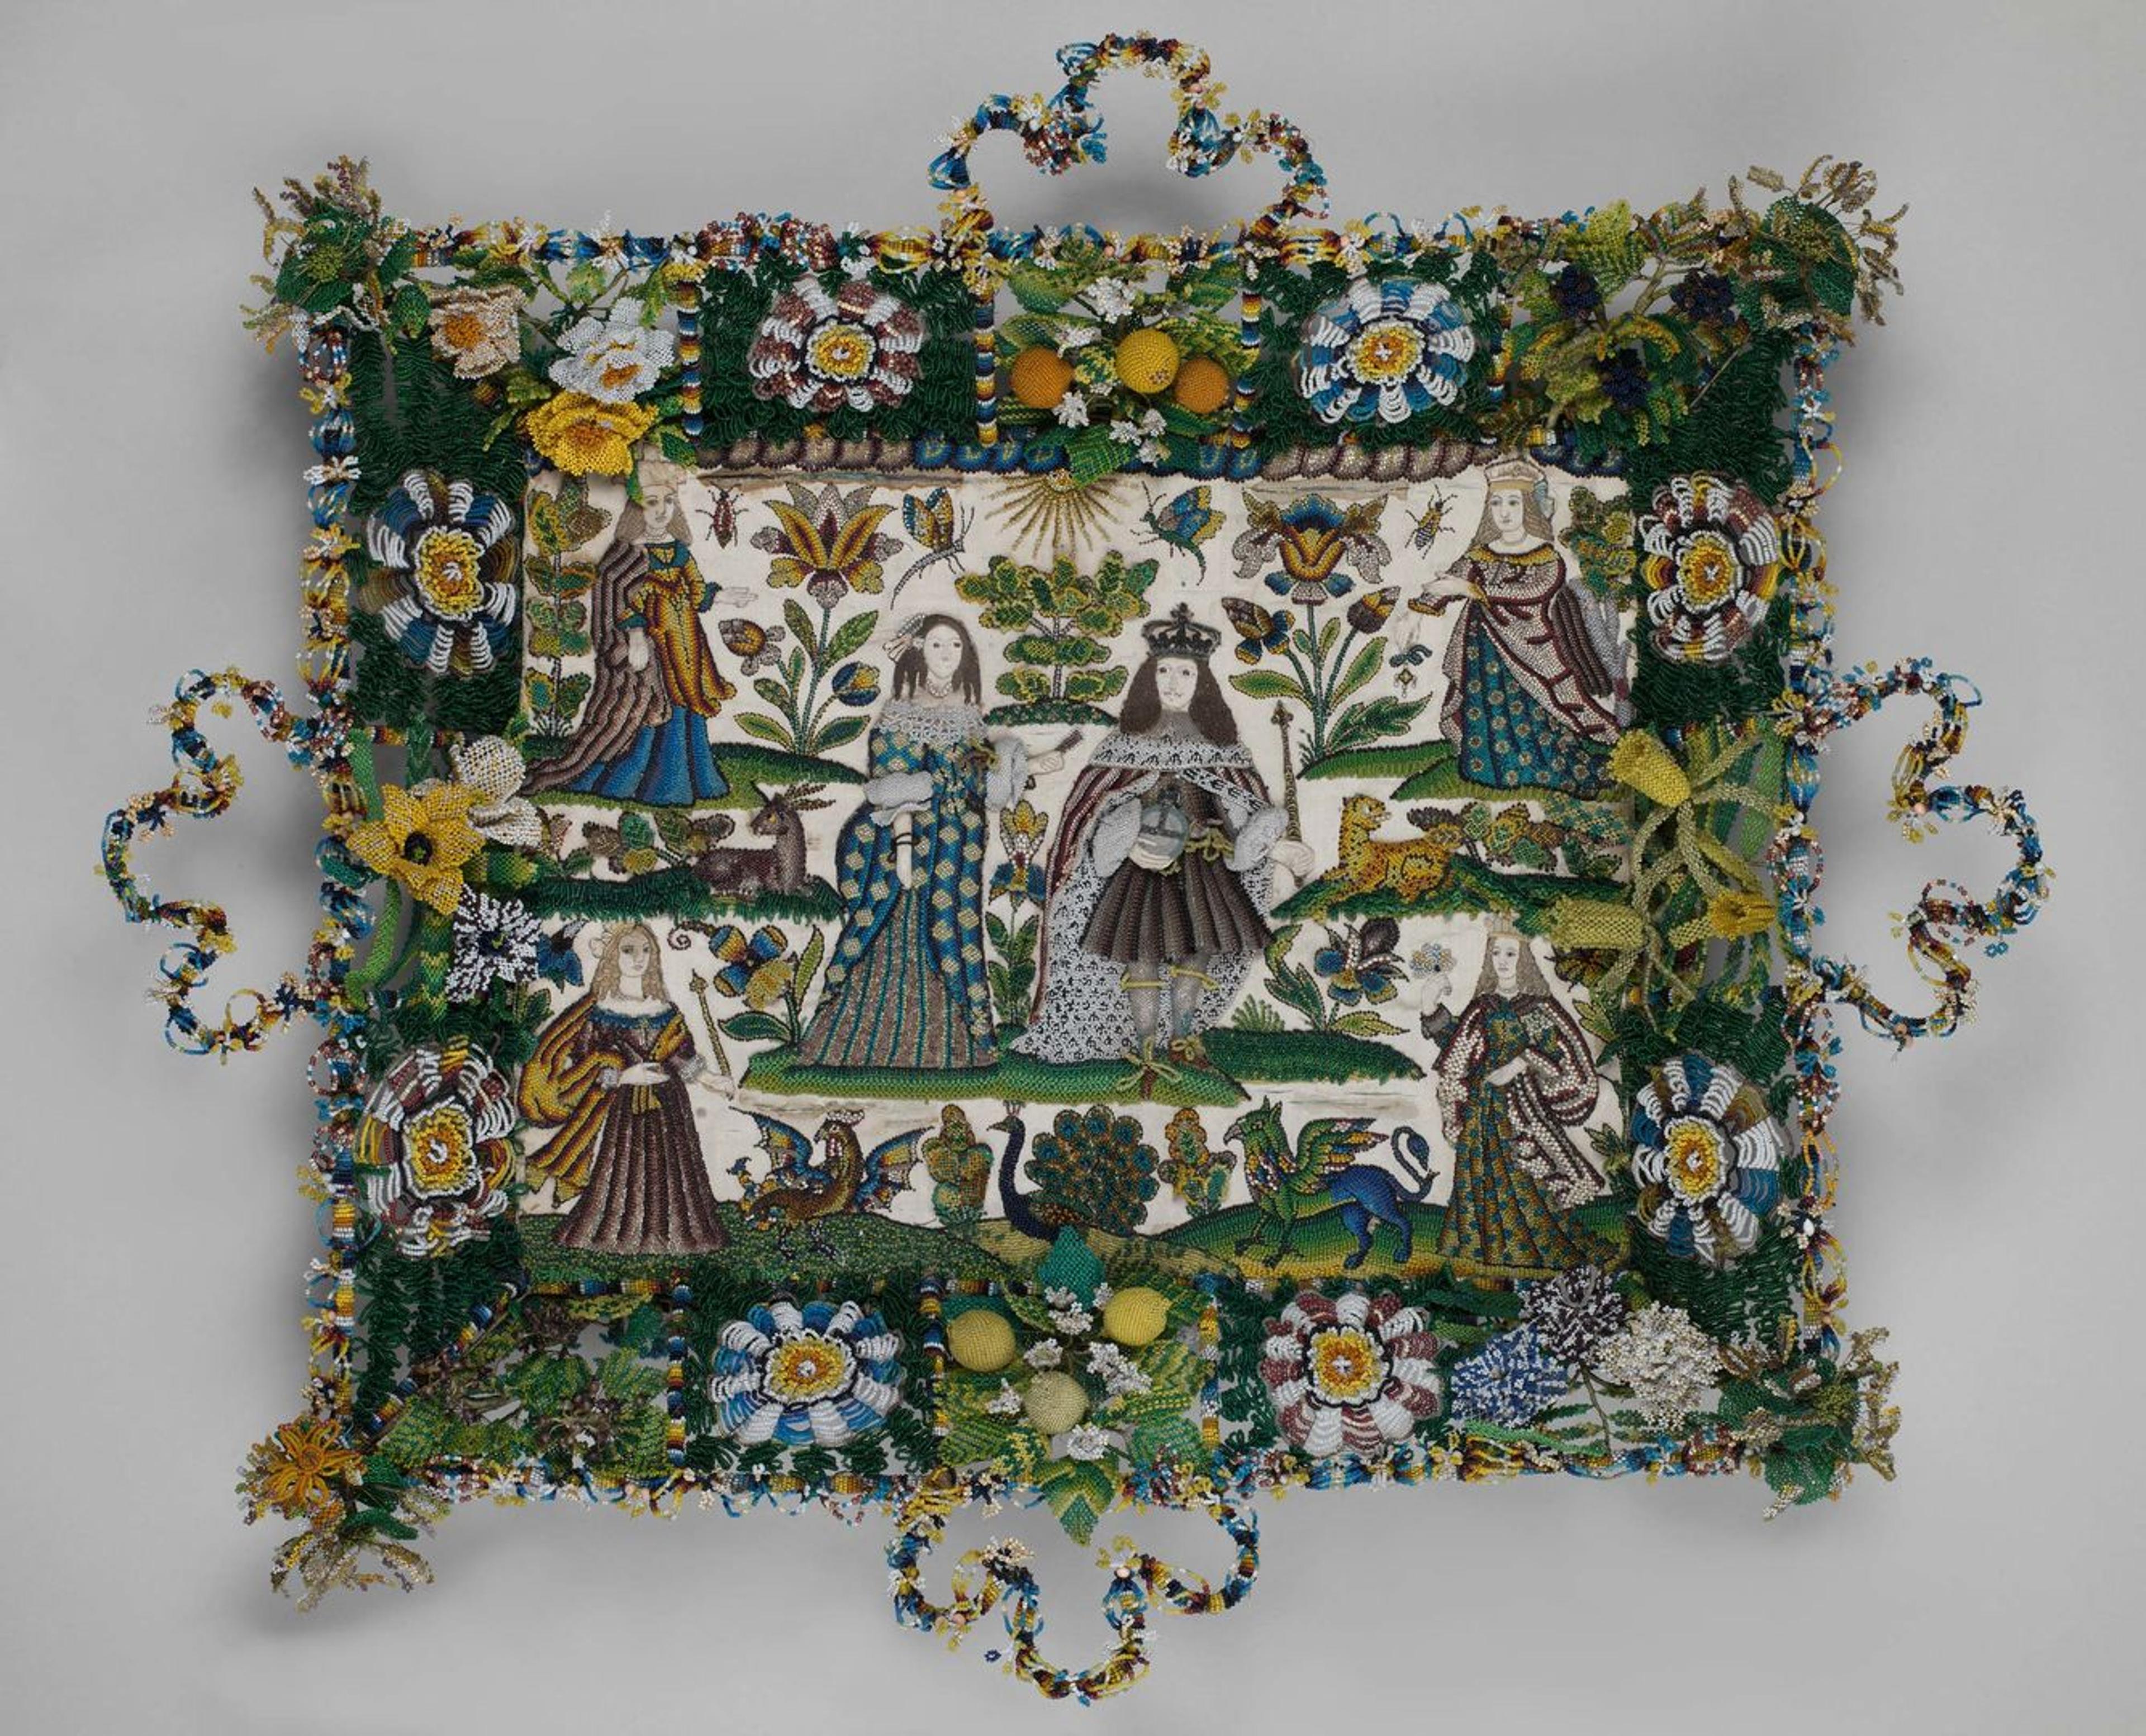 An ornate wedding basket made for the wedding of King Charles II and Catherine of Braganza